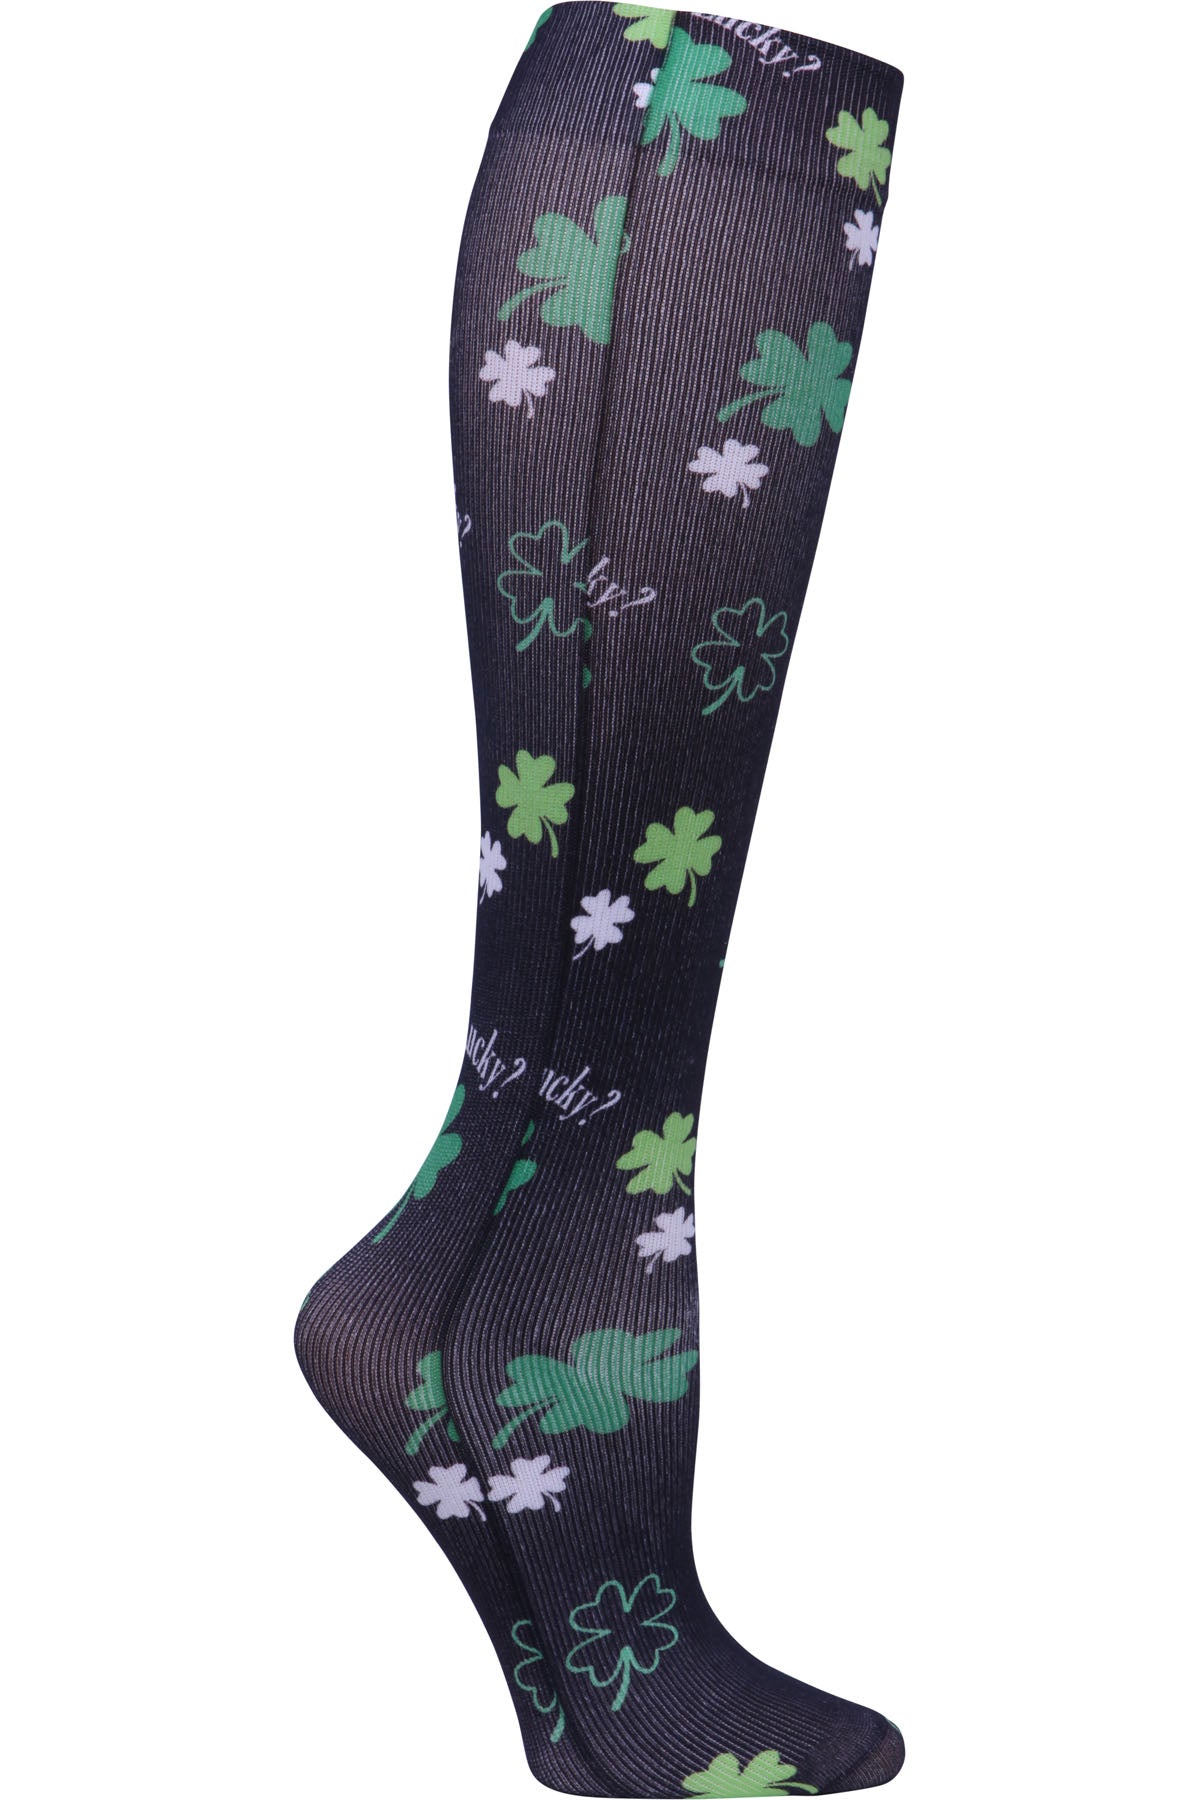 Celeste Stein Mild Compression Socks 8-15 mmHG Clever Clovers at Parker's Clothing and Shoes.